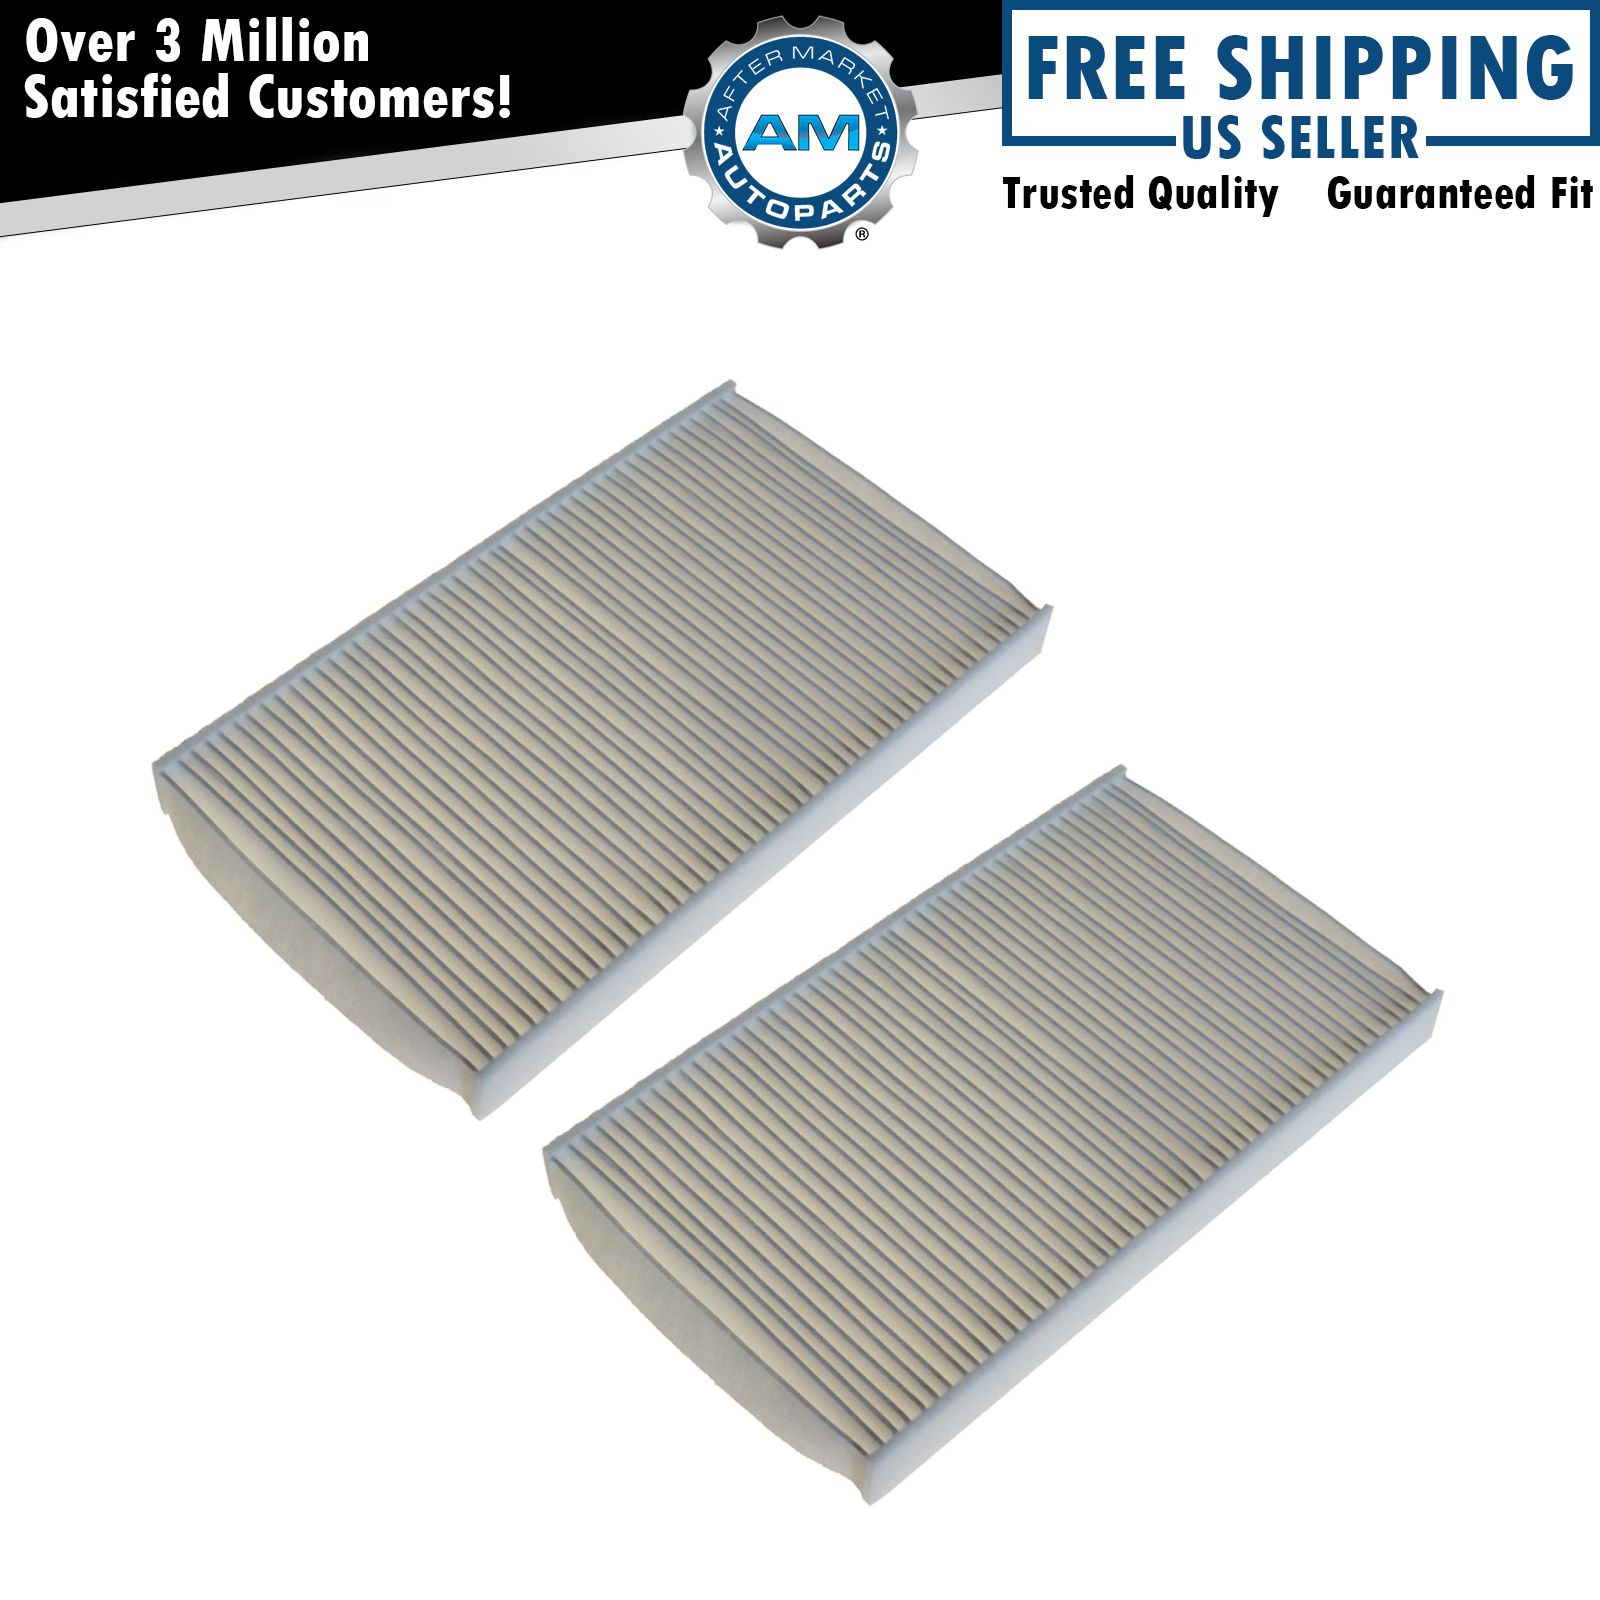 AC Delco CF104 Cabin Air Filter Pair Set of 2 for Chevy GMC Cadillac Truck SUV